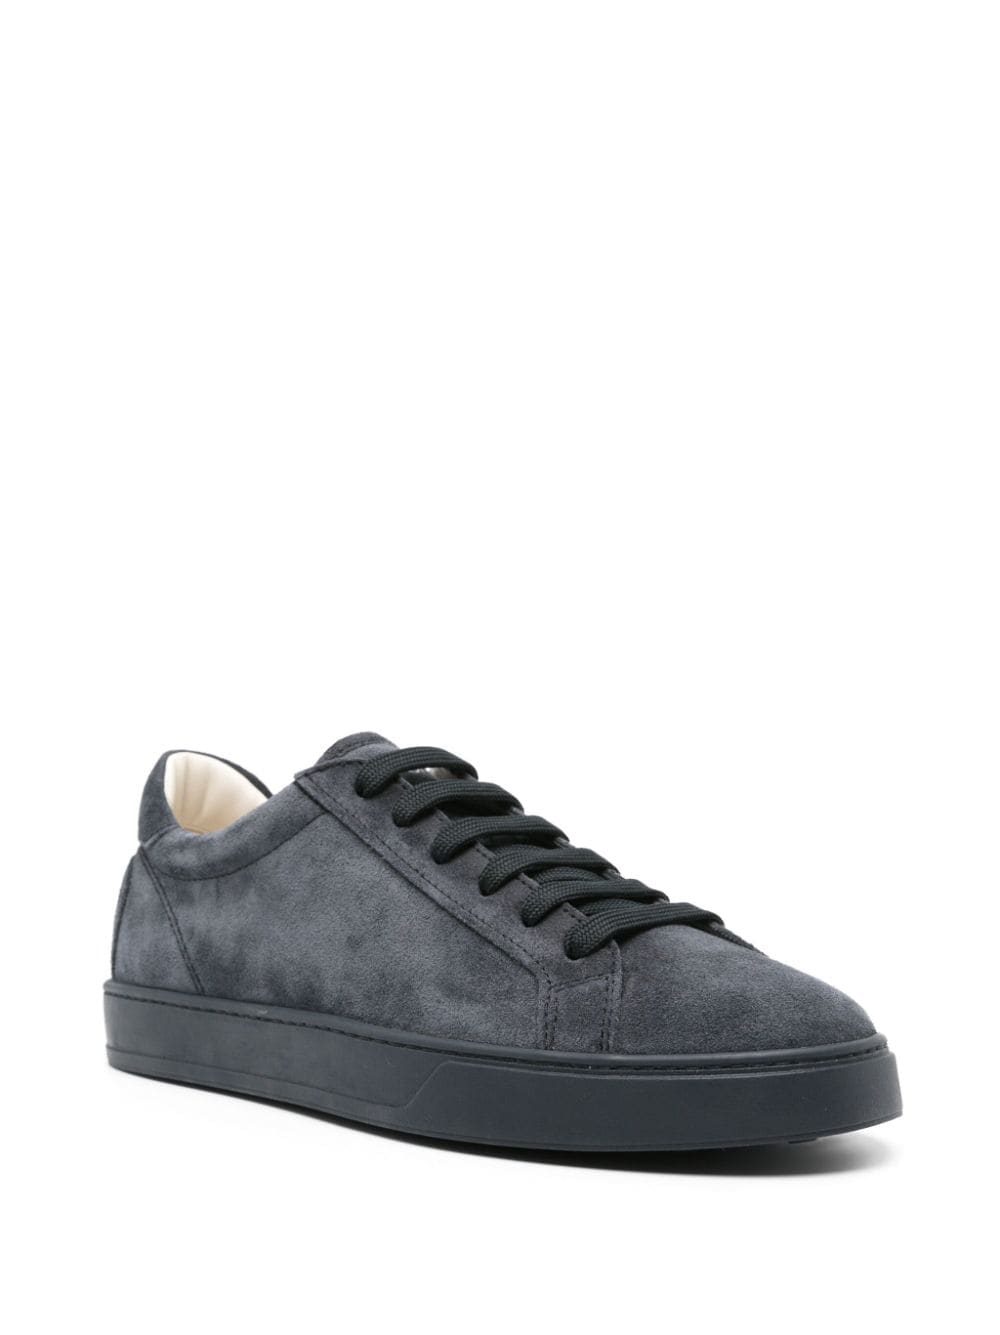 TOD'S Blue Suede Sneakers for Men - SS24 Collection